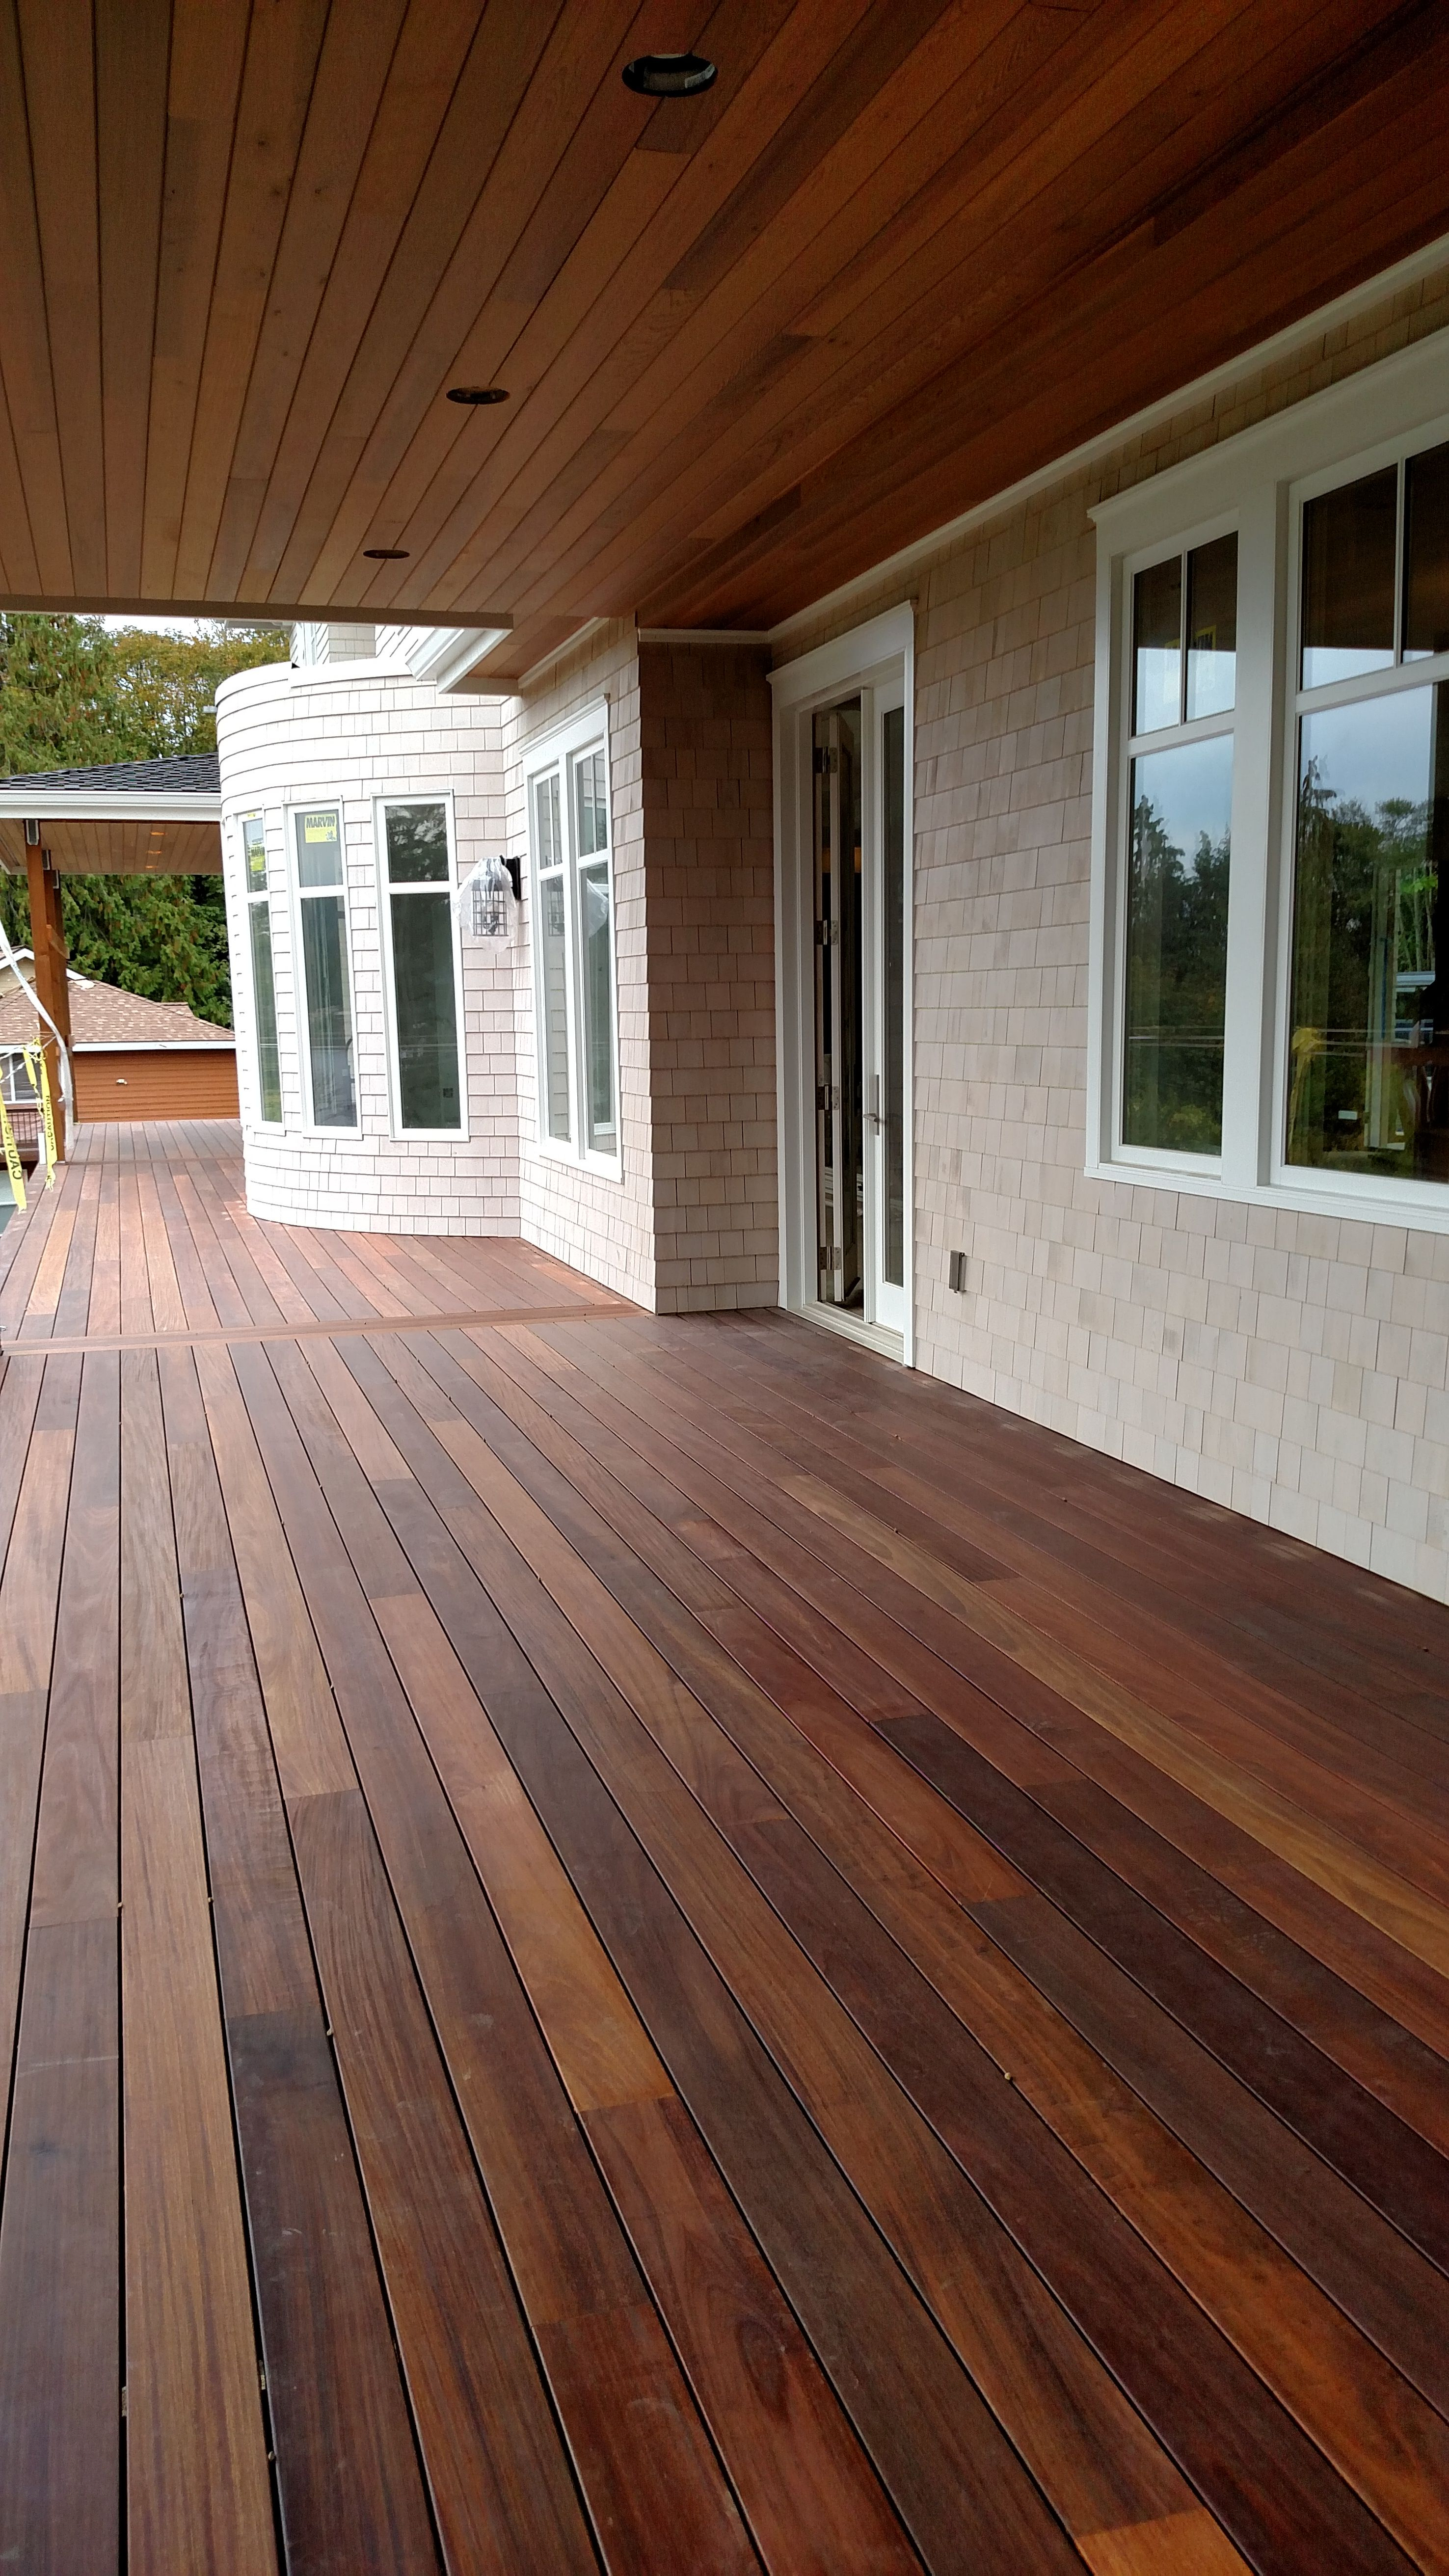 Mahogany Decking Applied With Penofin Exotic Hardwood Exterior Stain regarding proportions 2952 X 5248